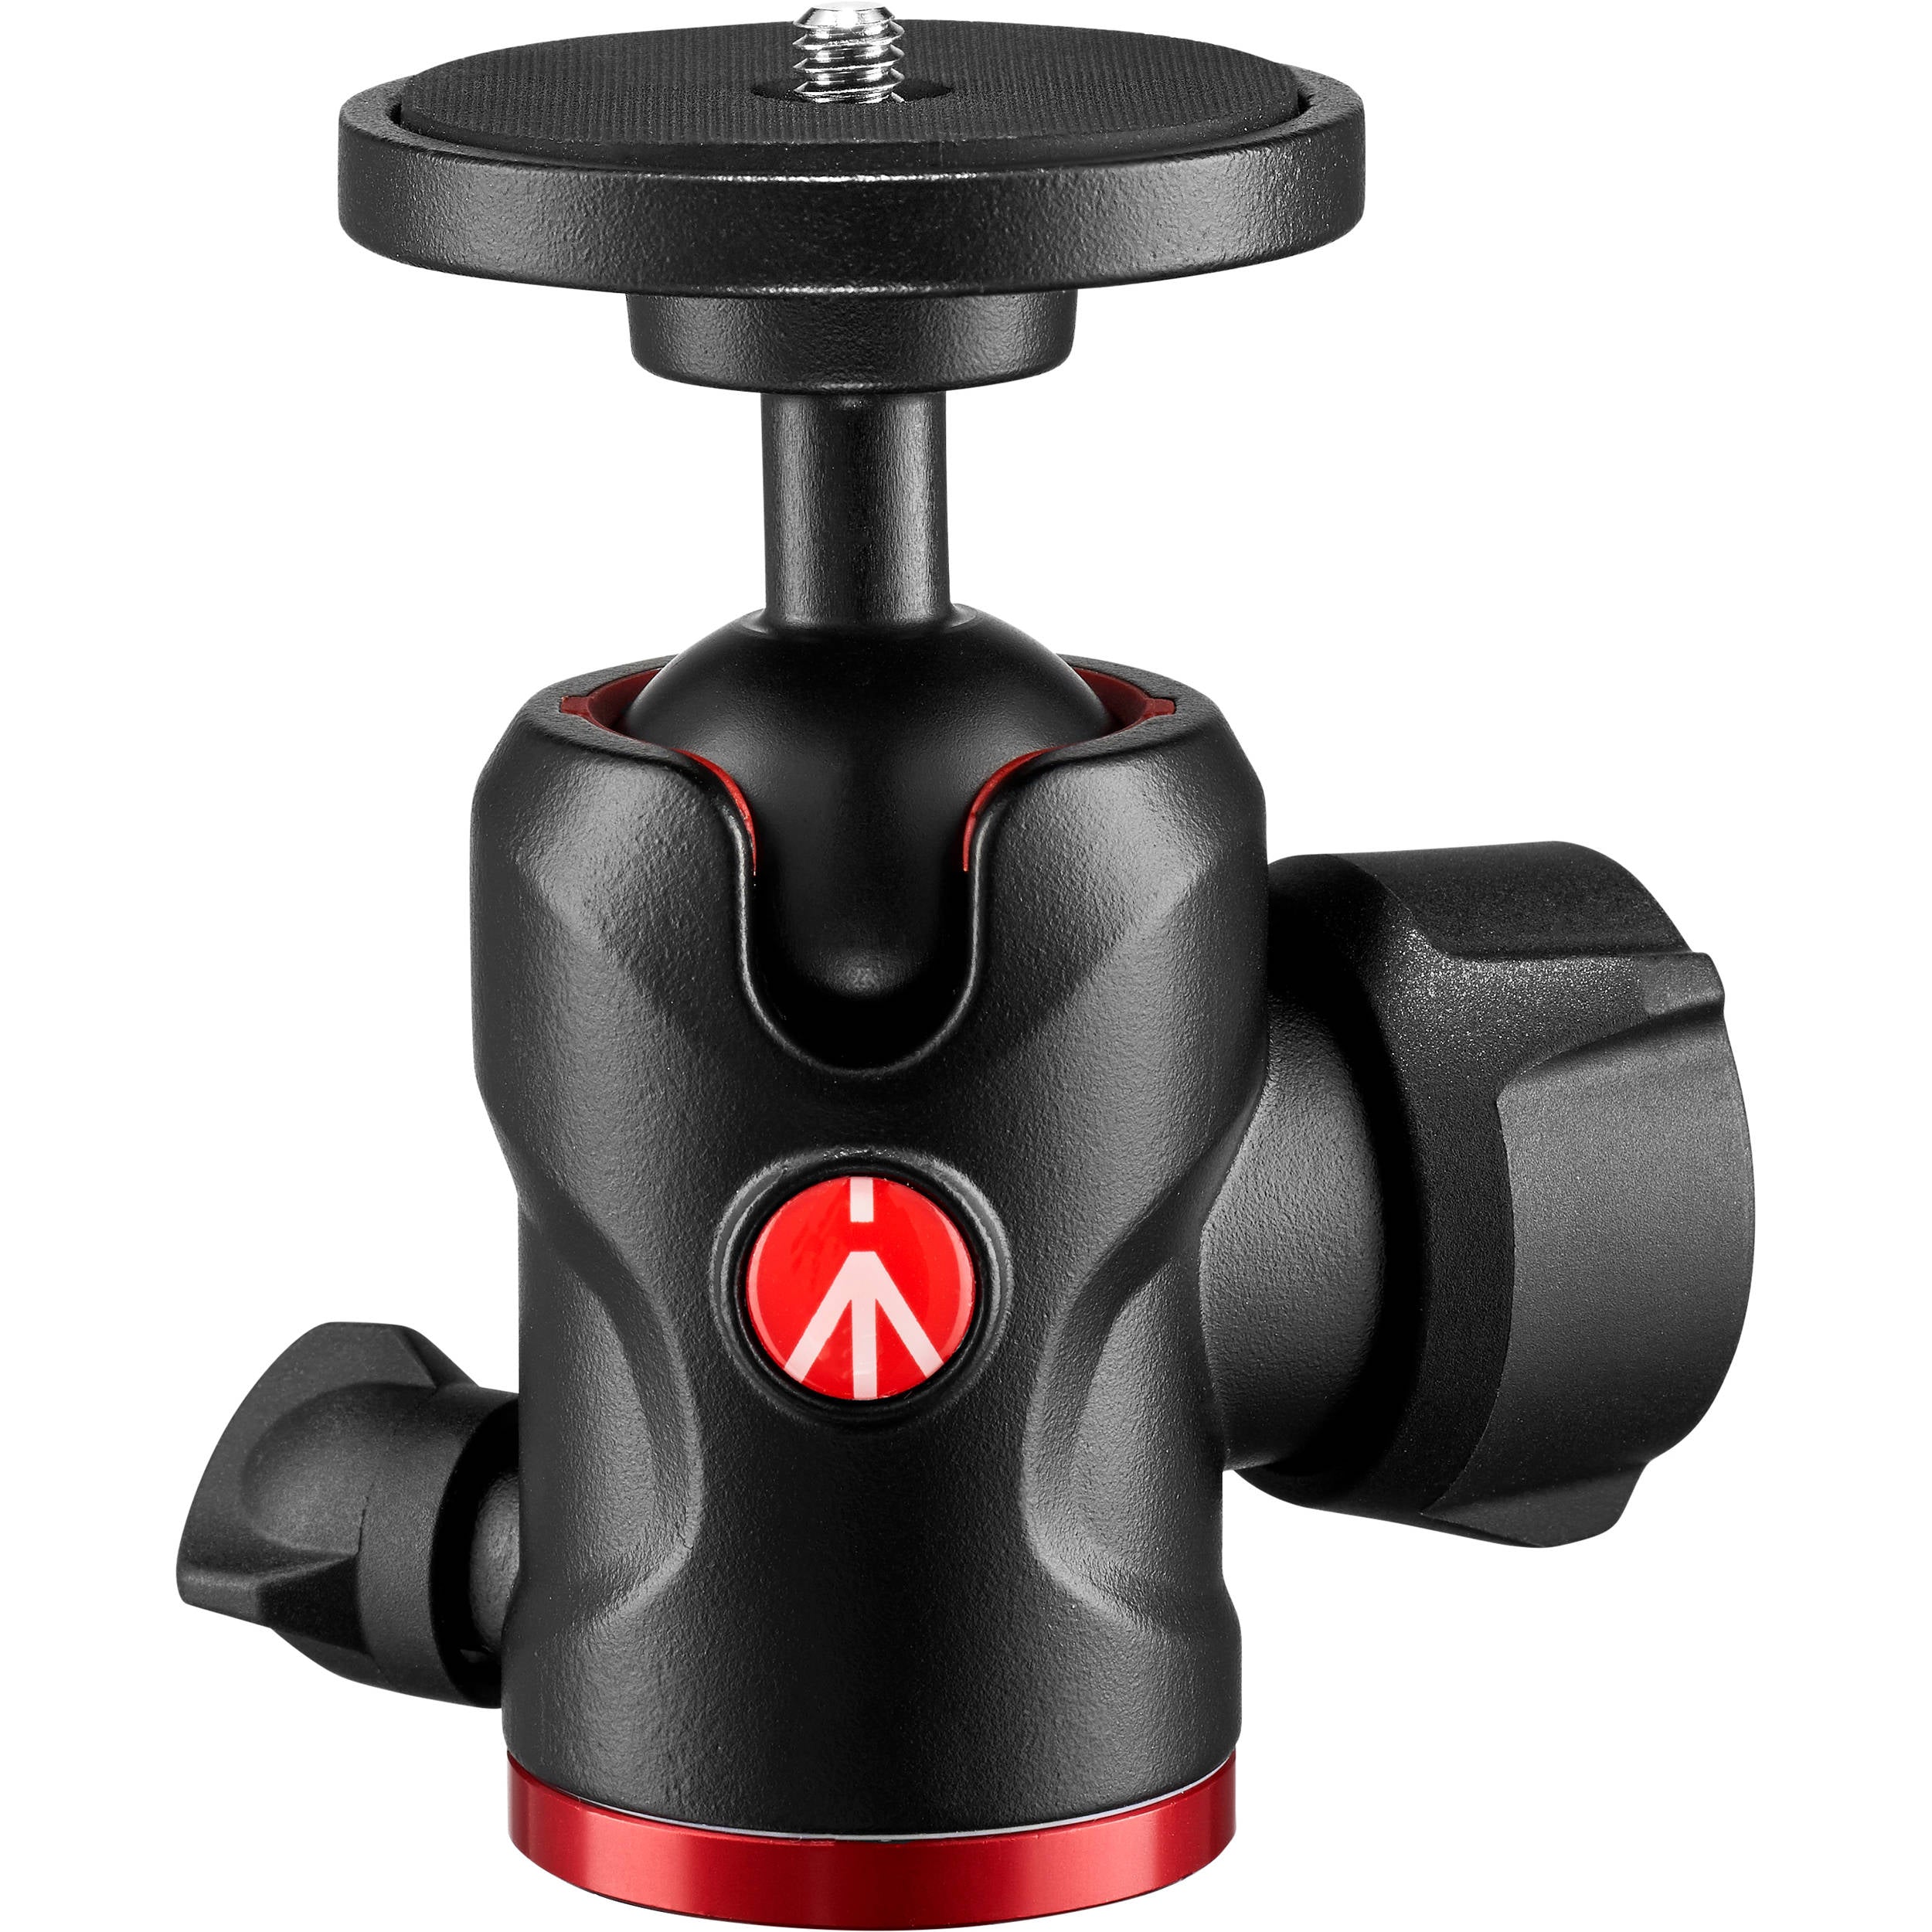 Manfrotto 494 Center Ball Head with Universal Round Disc Mount